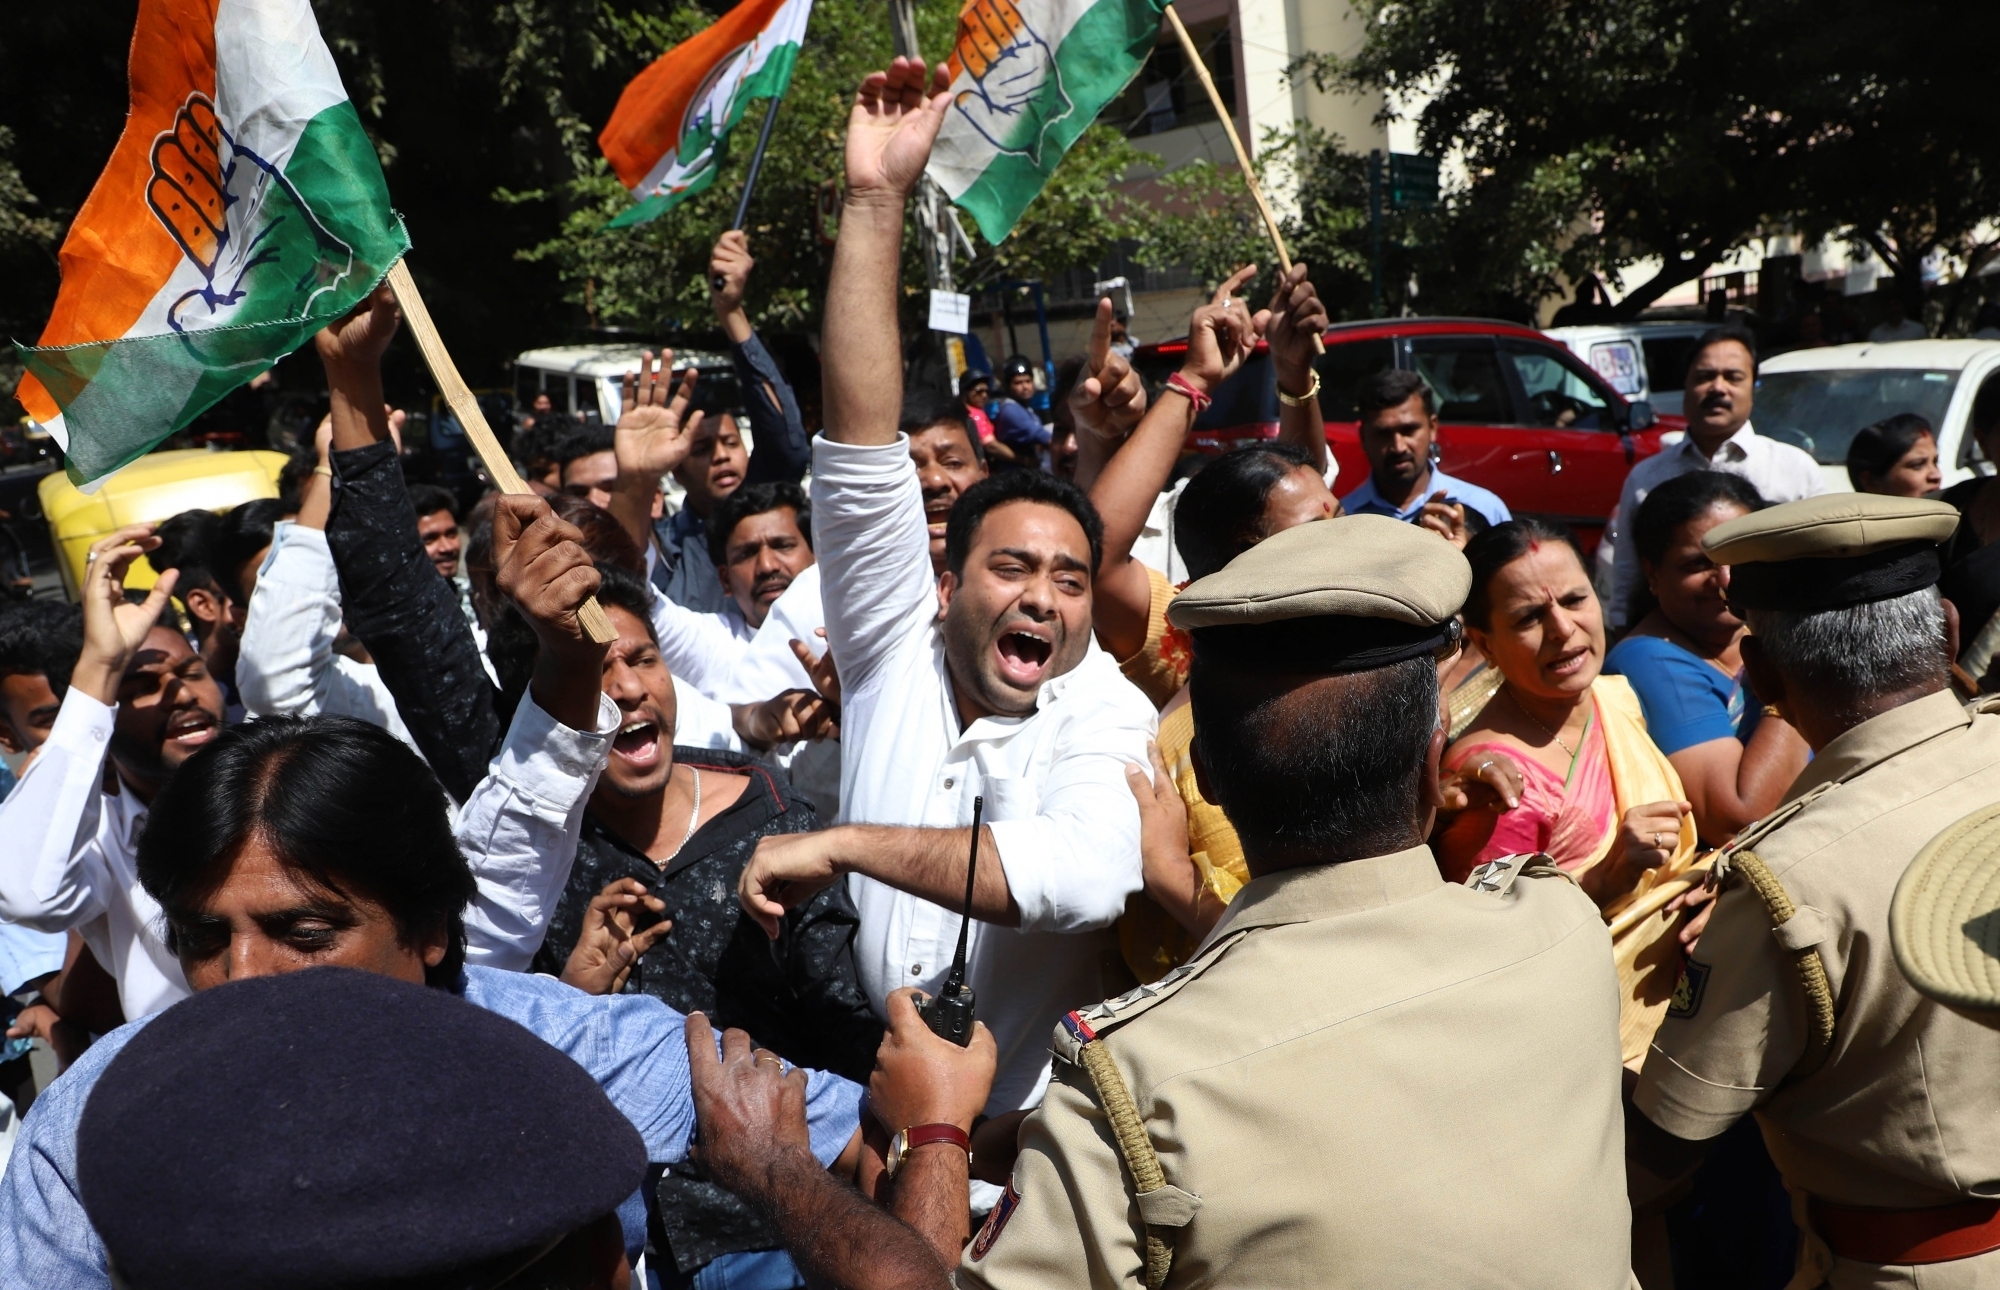 80 Congress members arrested ahead of march to support Shahjahanabad student